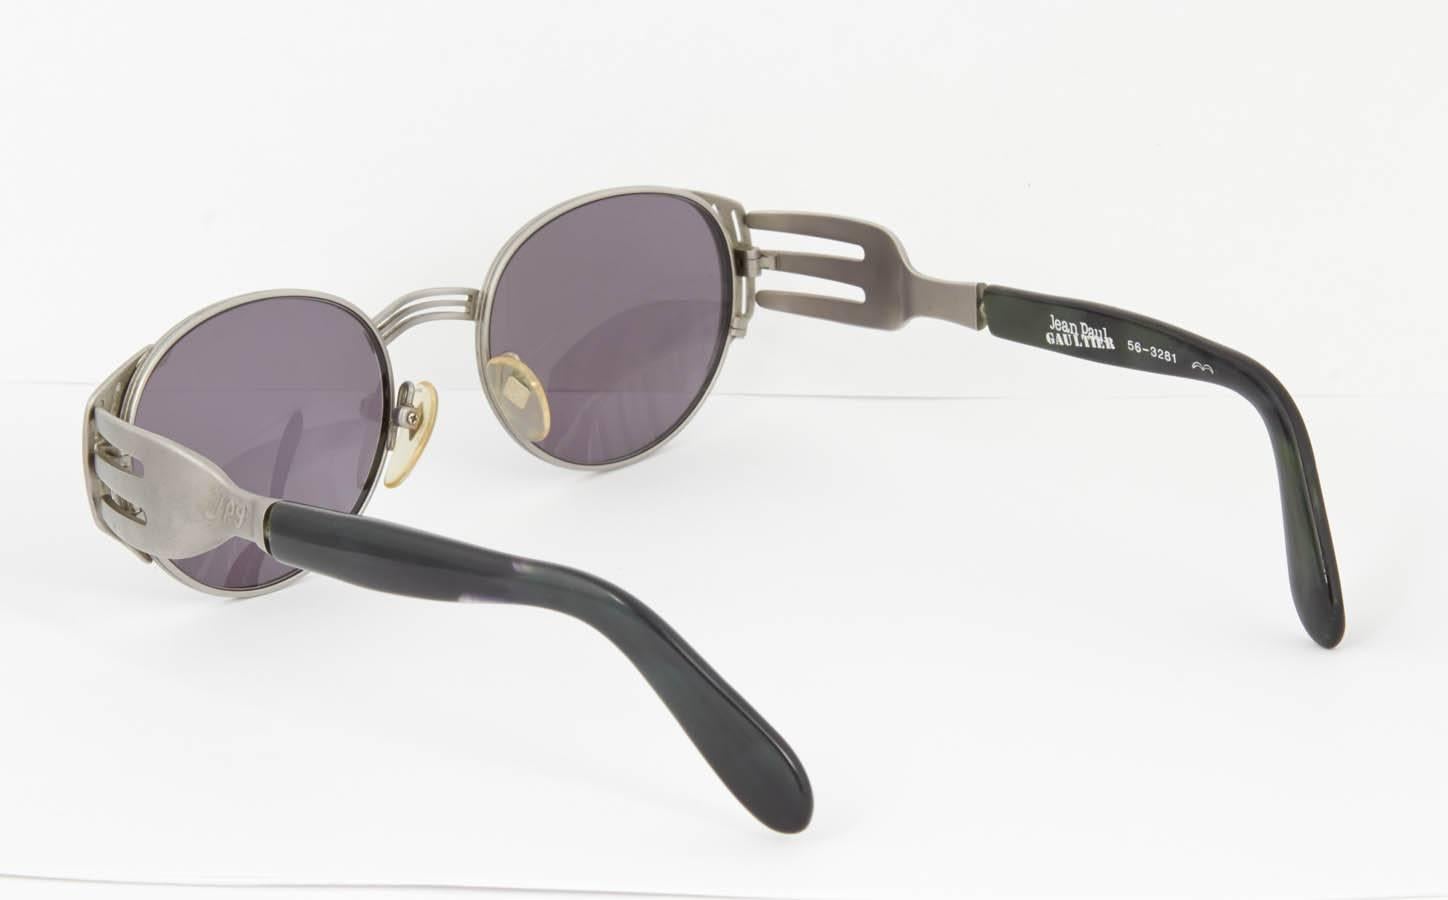 Jean Paul Gaultier 56-3281 Fork Vintage Sunglasses In Excellent Condition For Sale In Chicago, IL